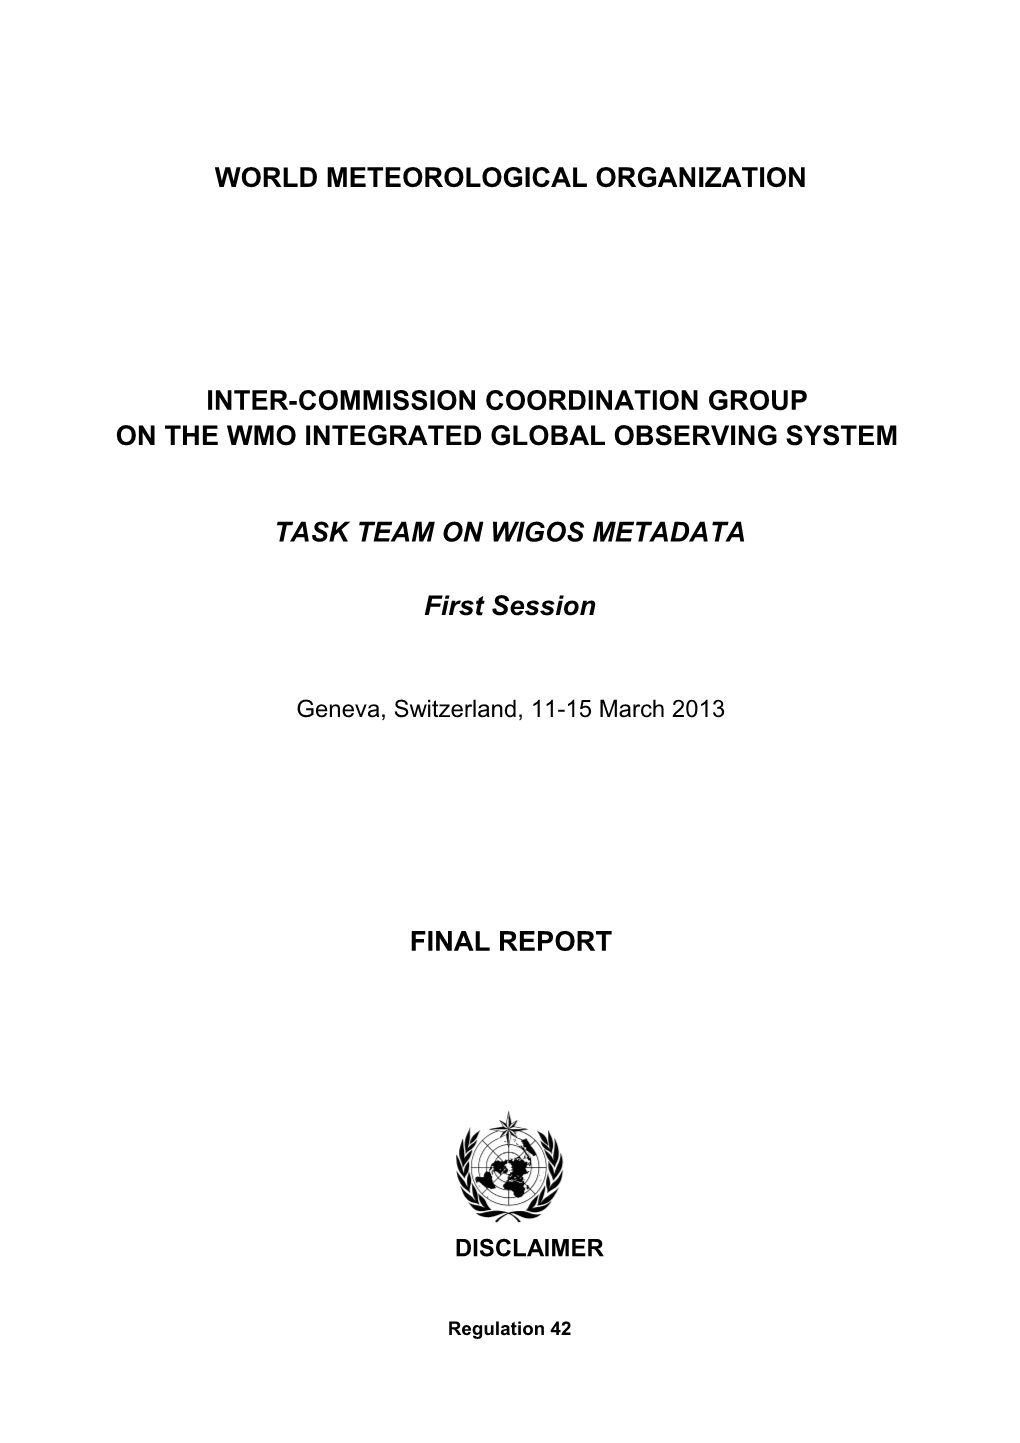 Inter-Commission Coordination Group